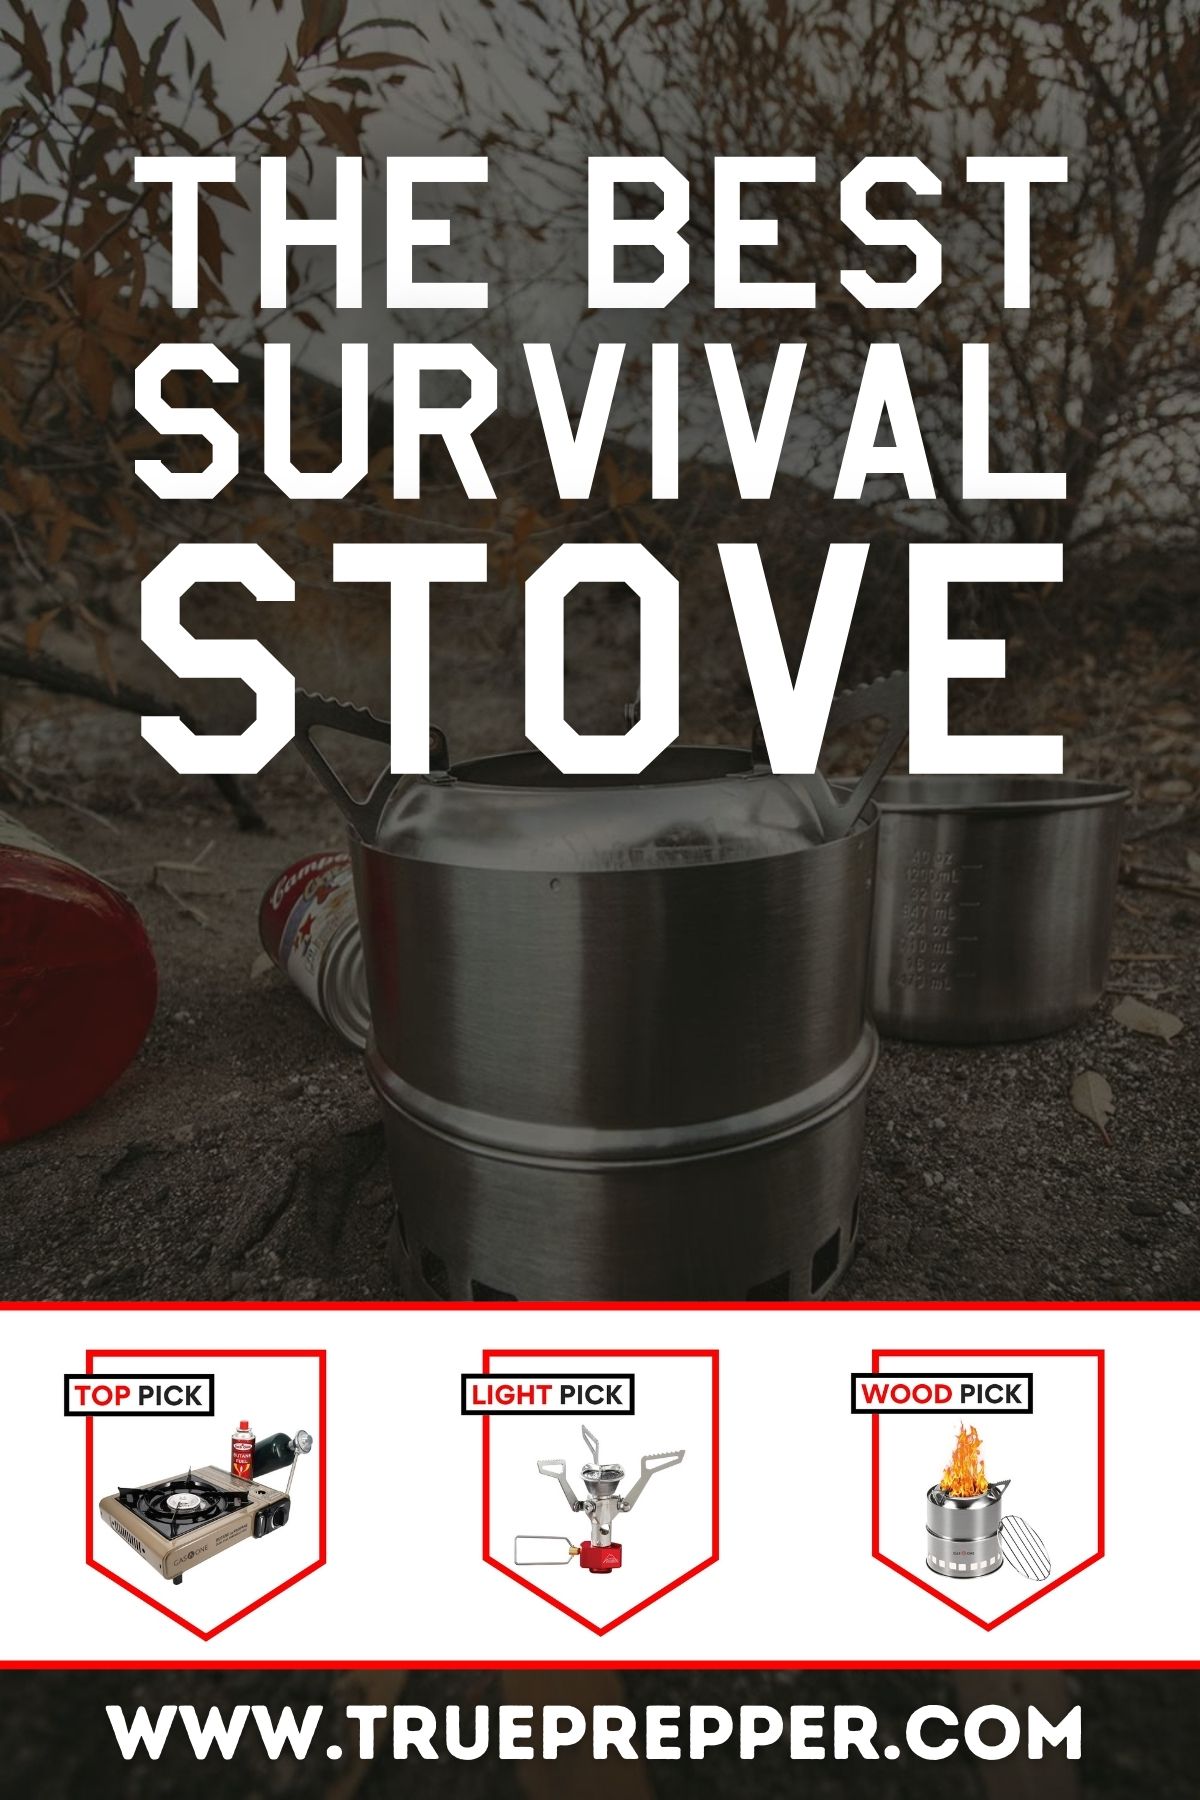 The Best Survival Stove